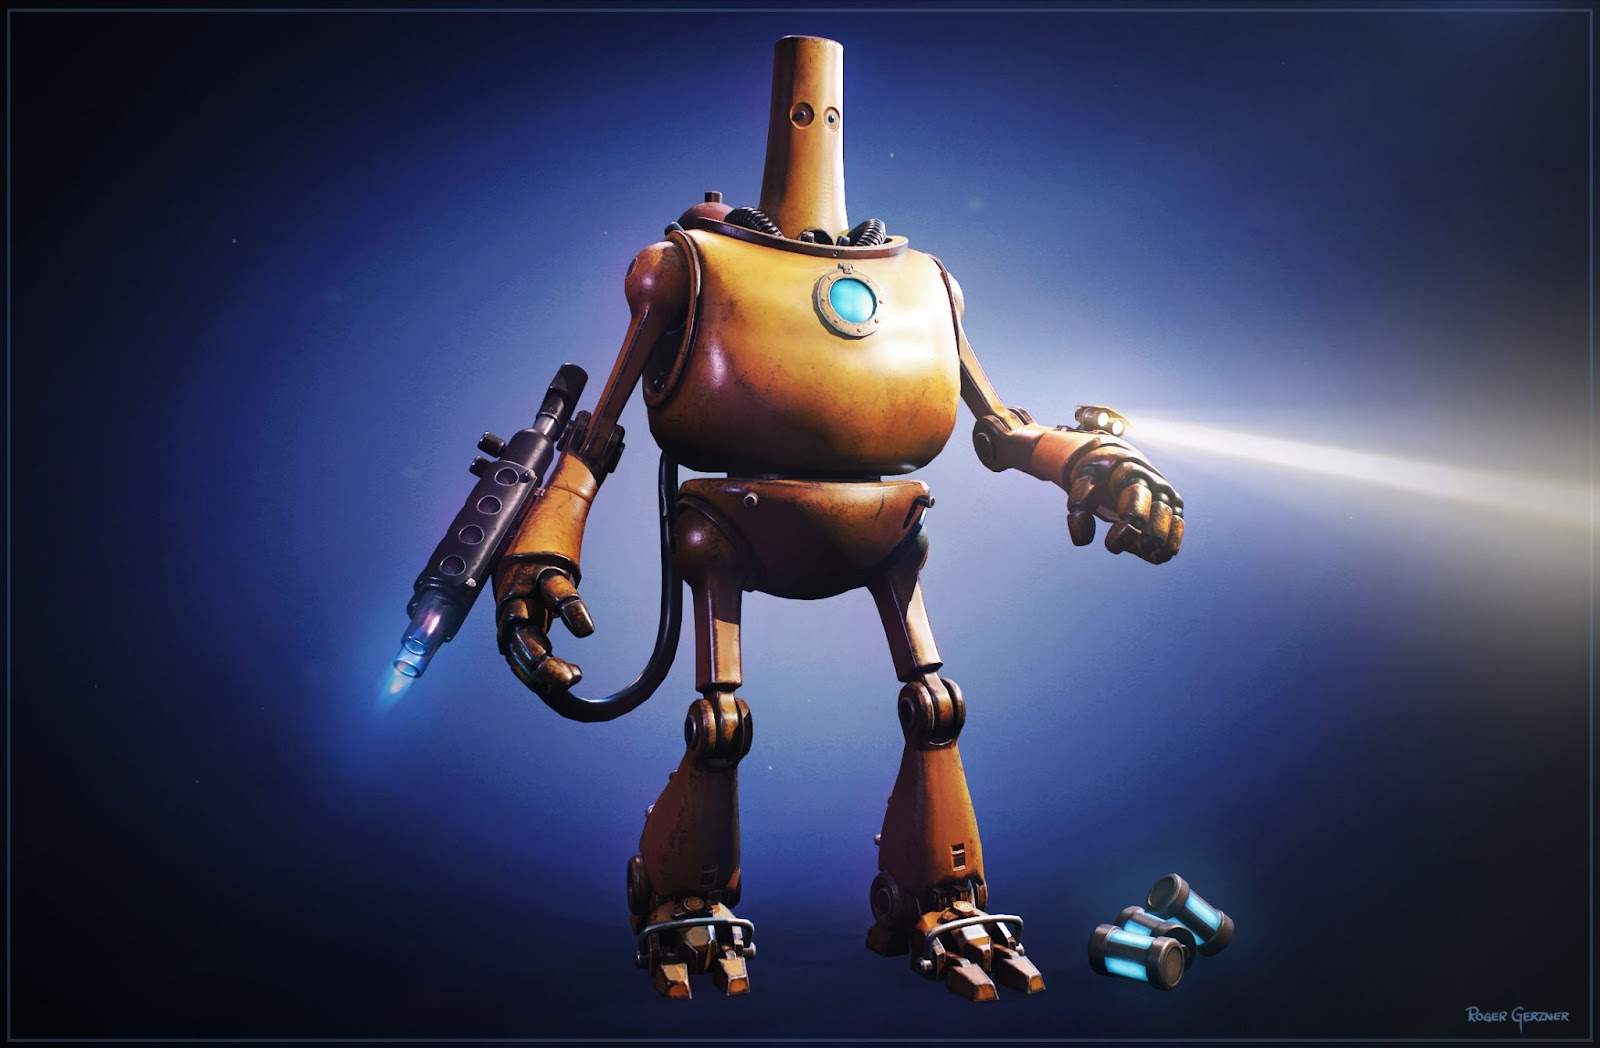 A 3D stylized droid by Roger Gerzner.